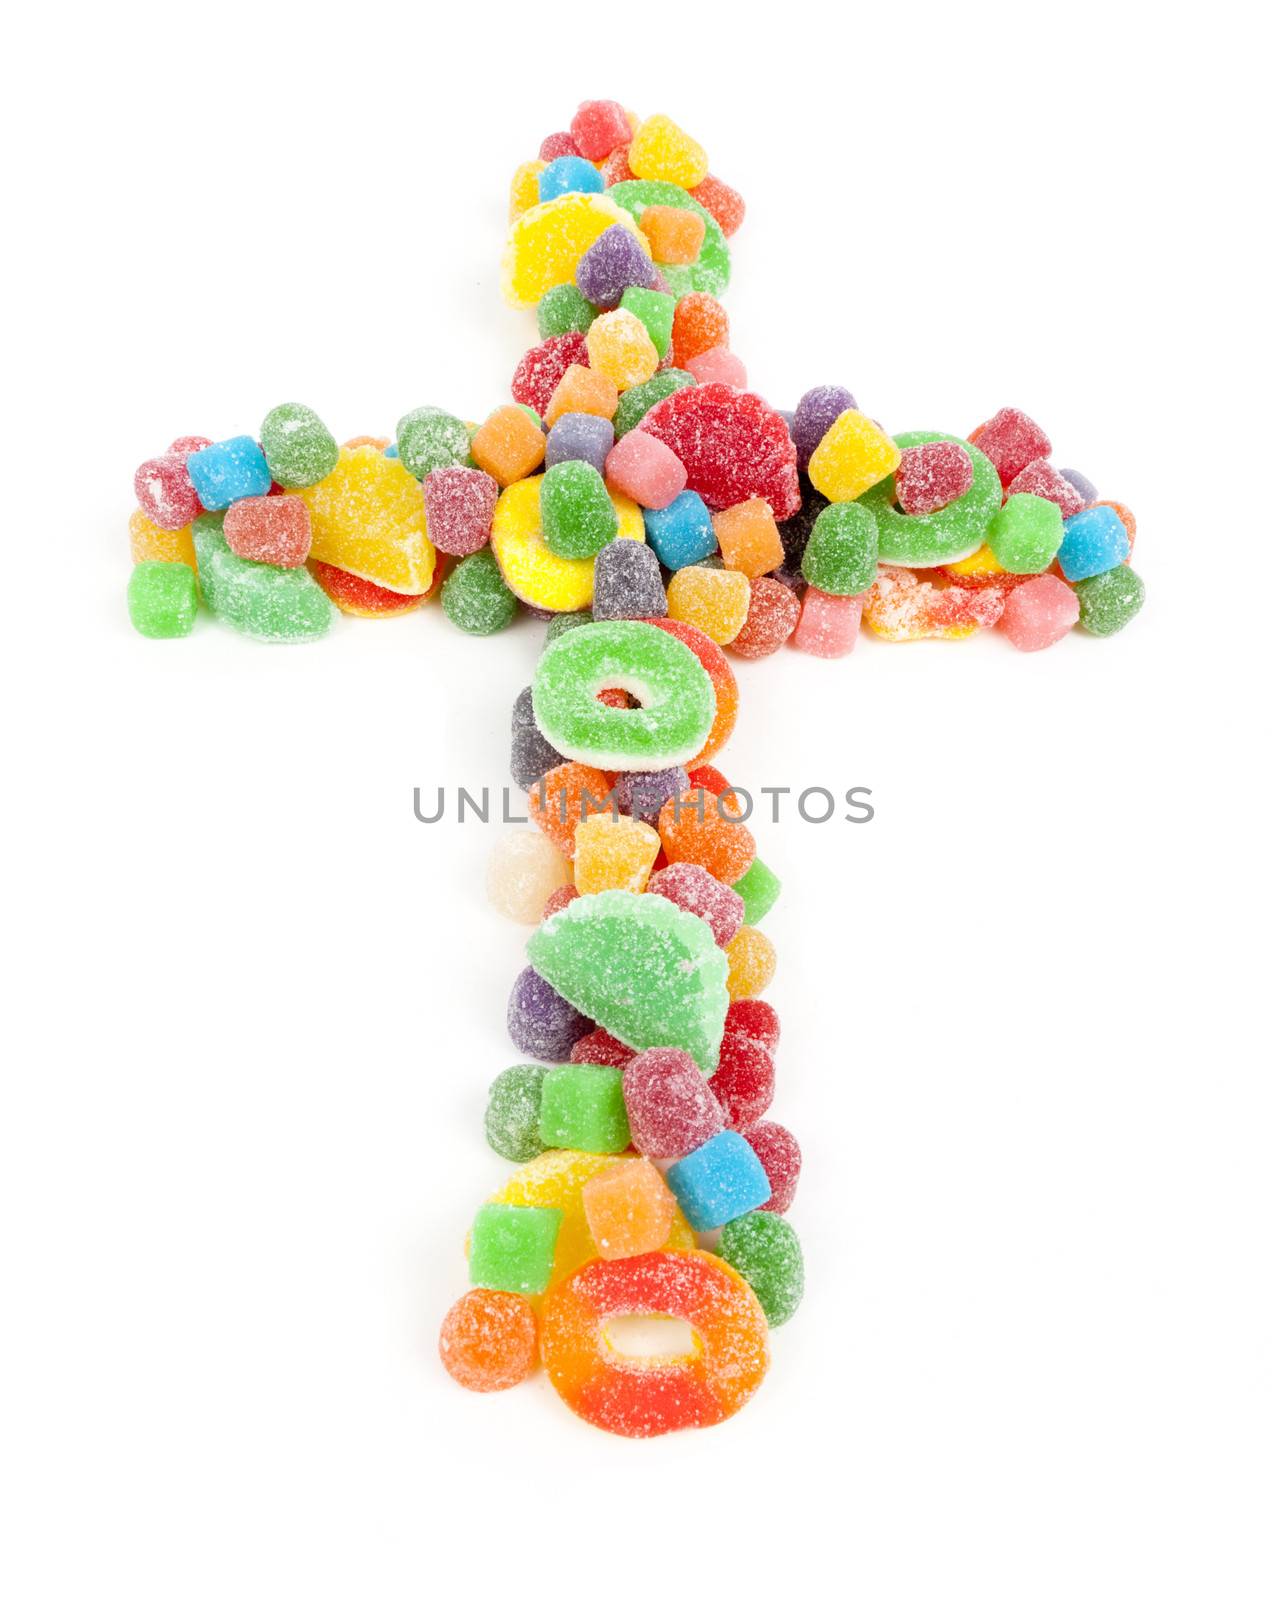 A Christian cross made of sugared gummy candy against a white background.